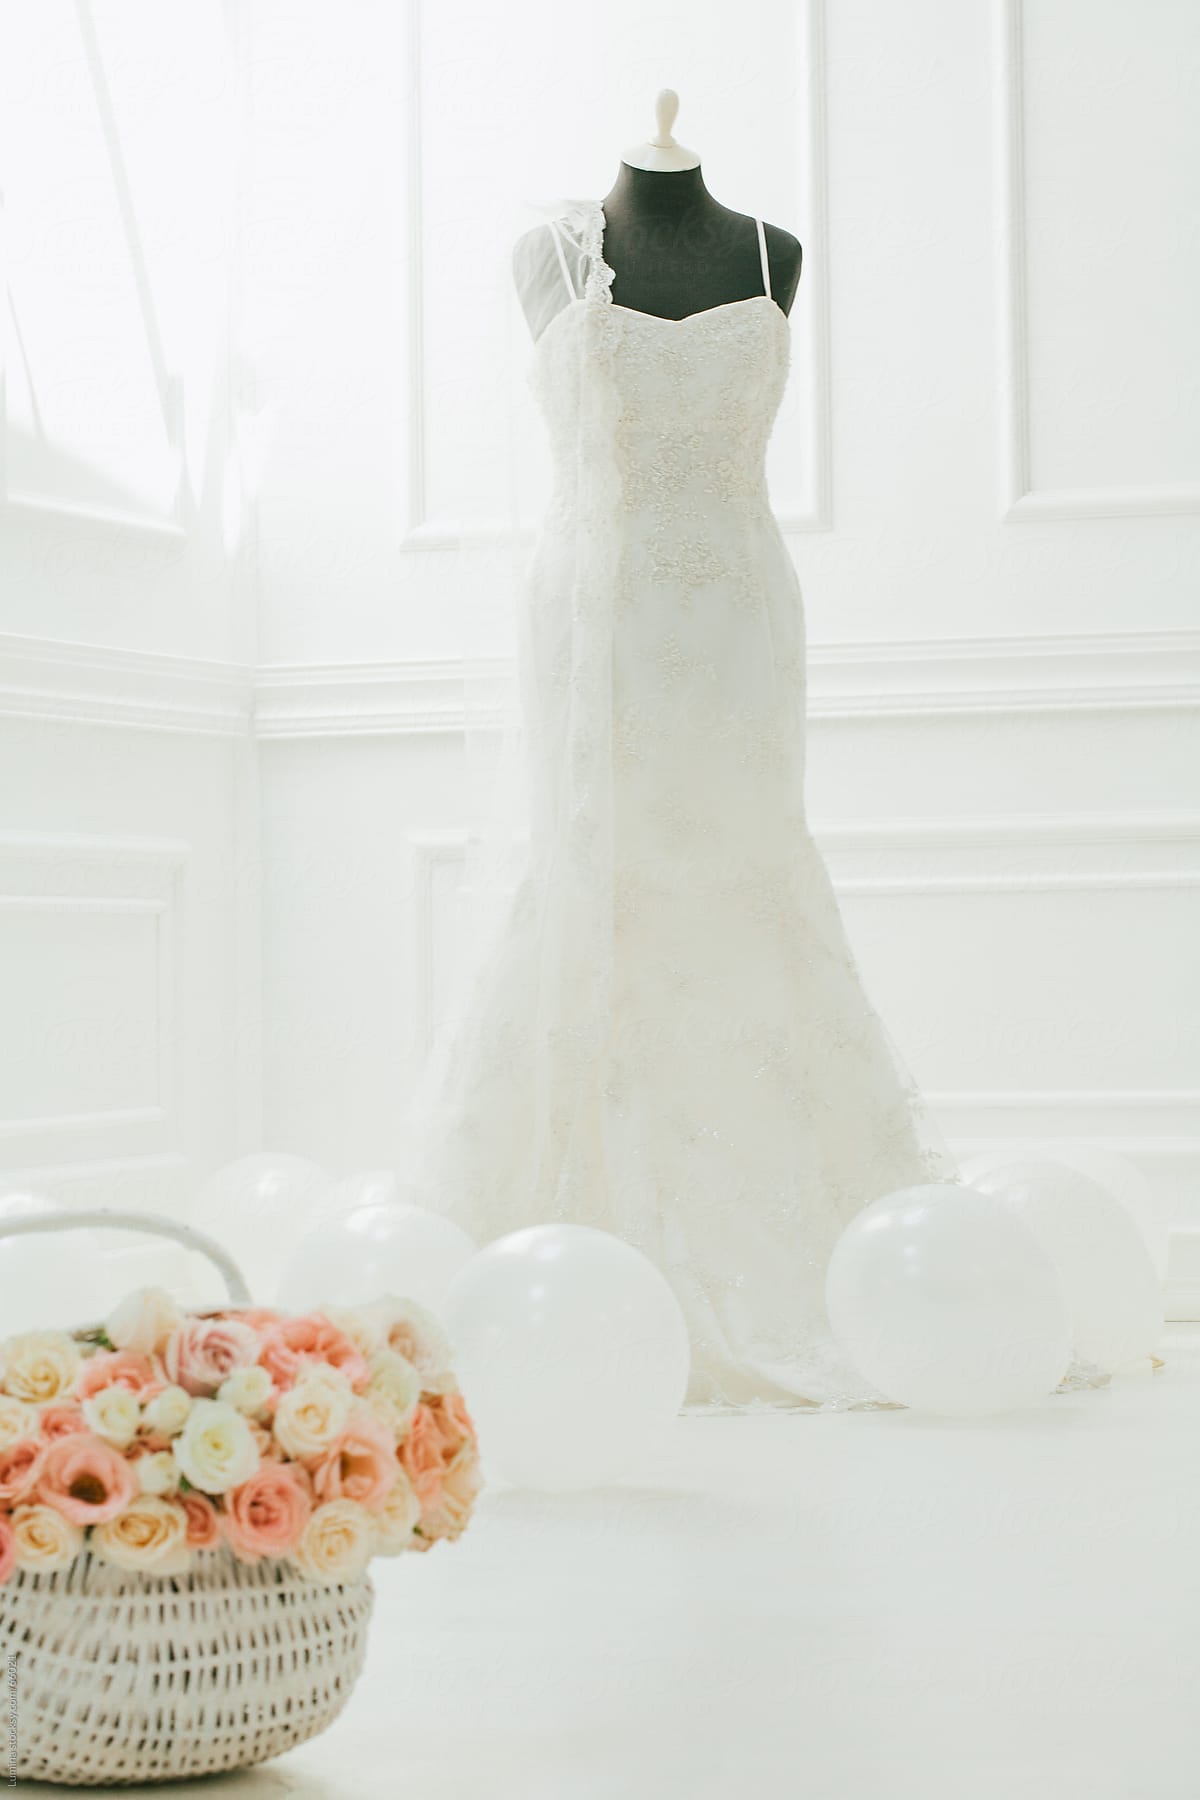 Wedding Dress, Roses and Balloons